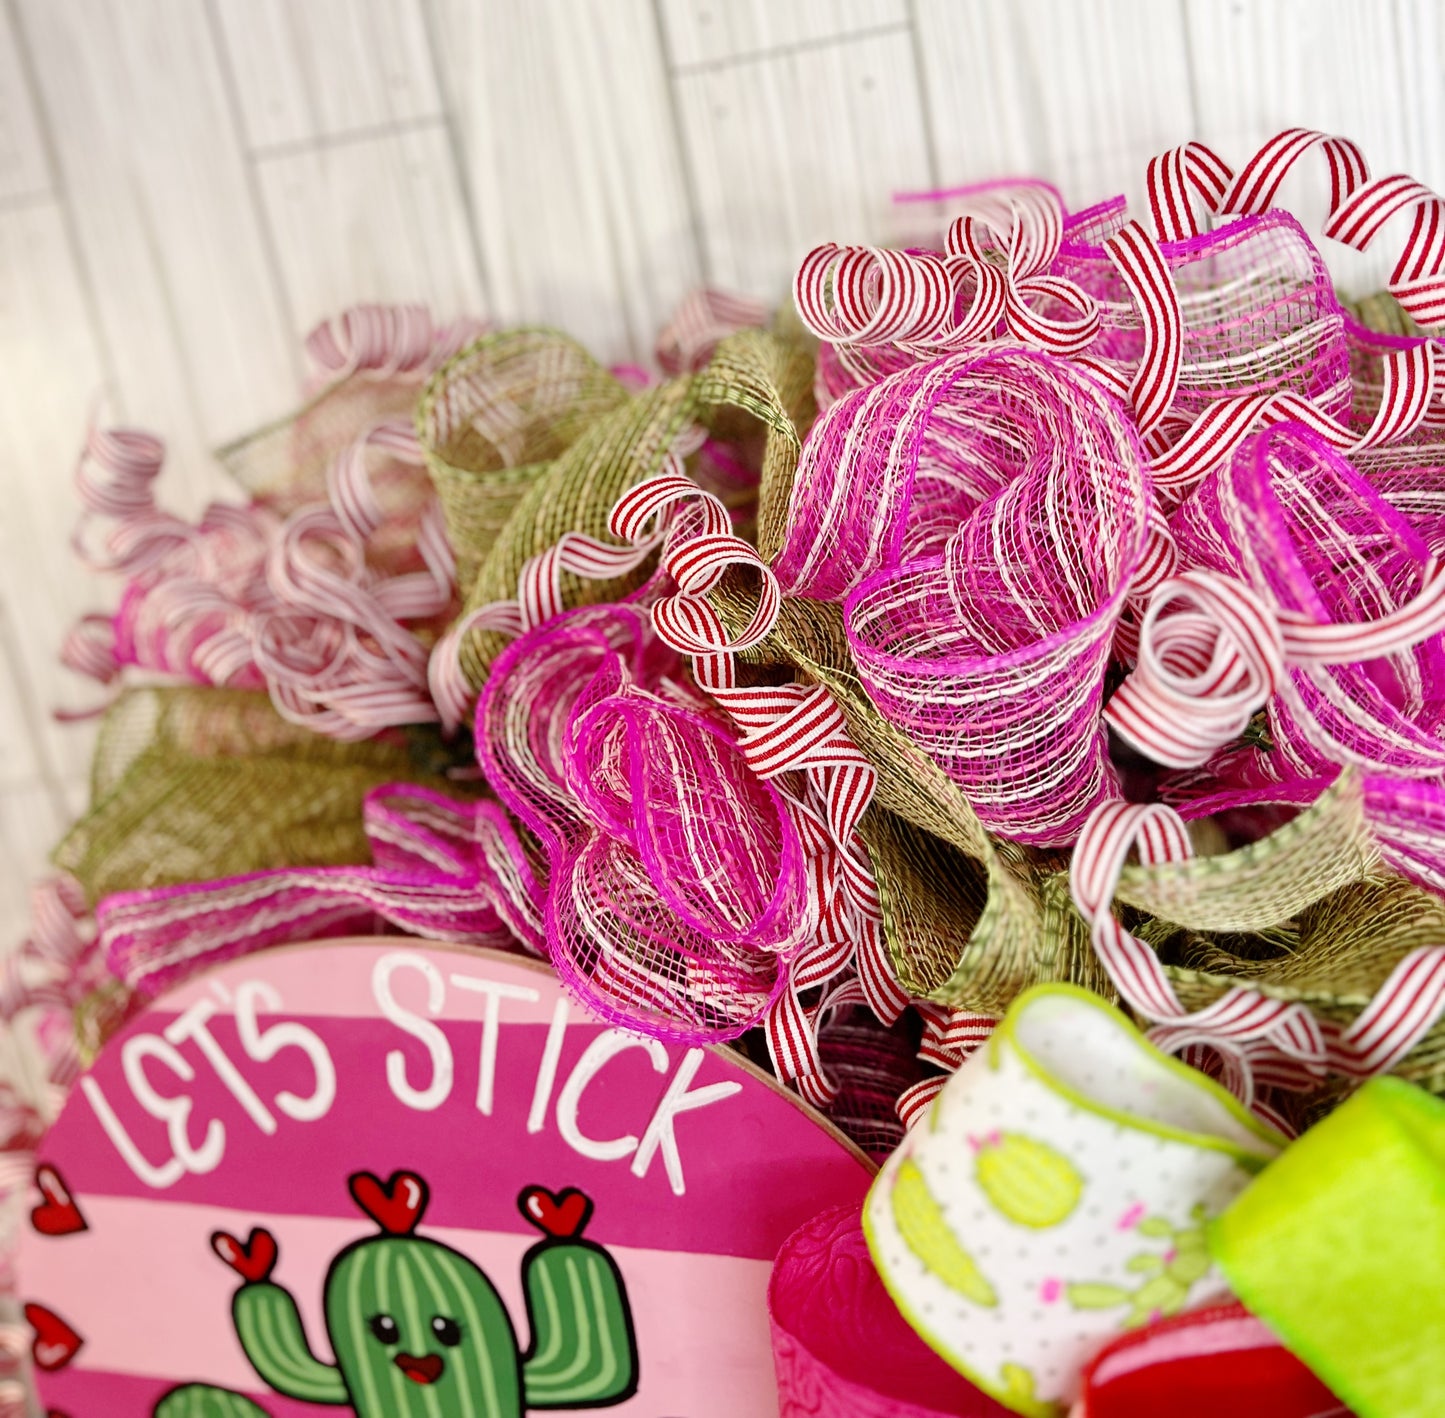 Let’s Stick Together Cactus Wreath